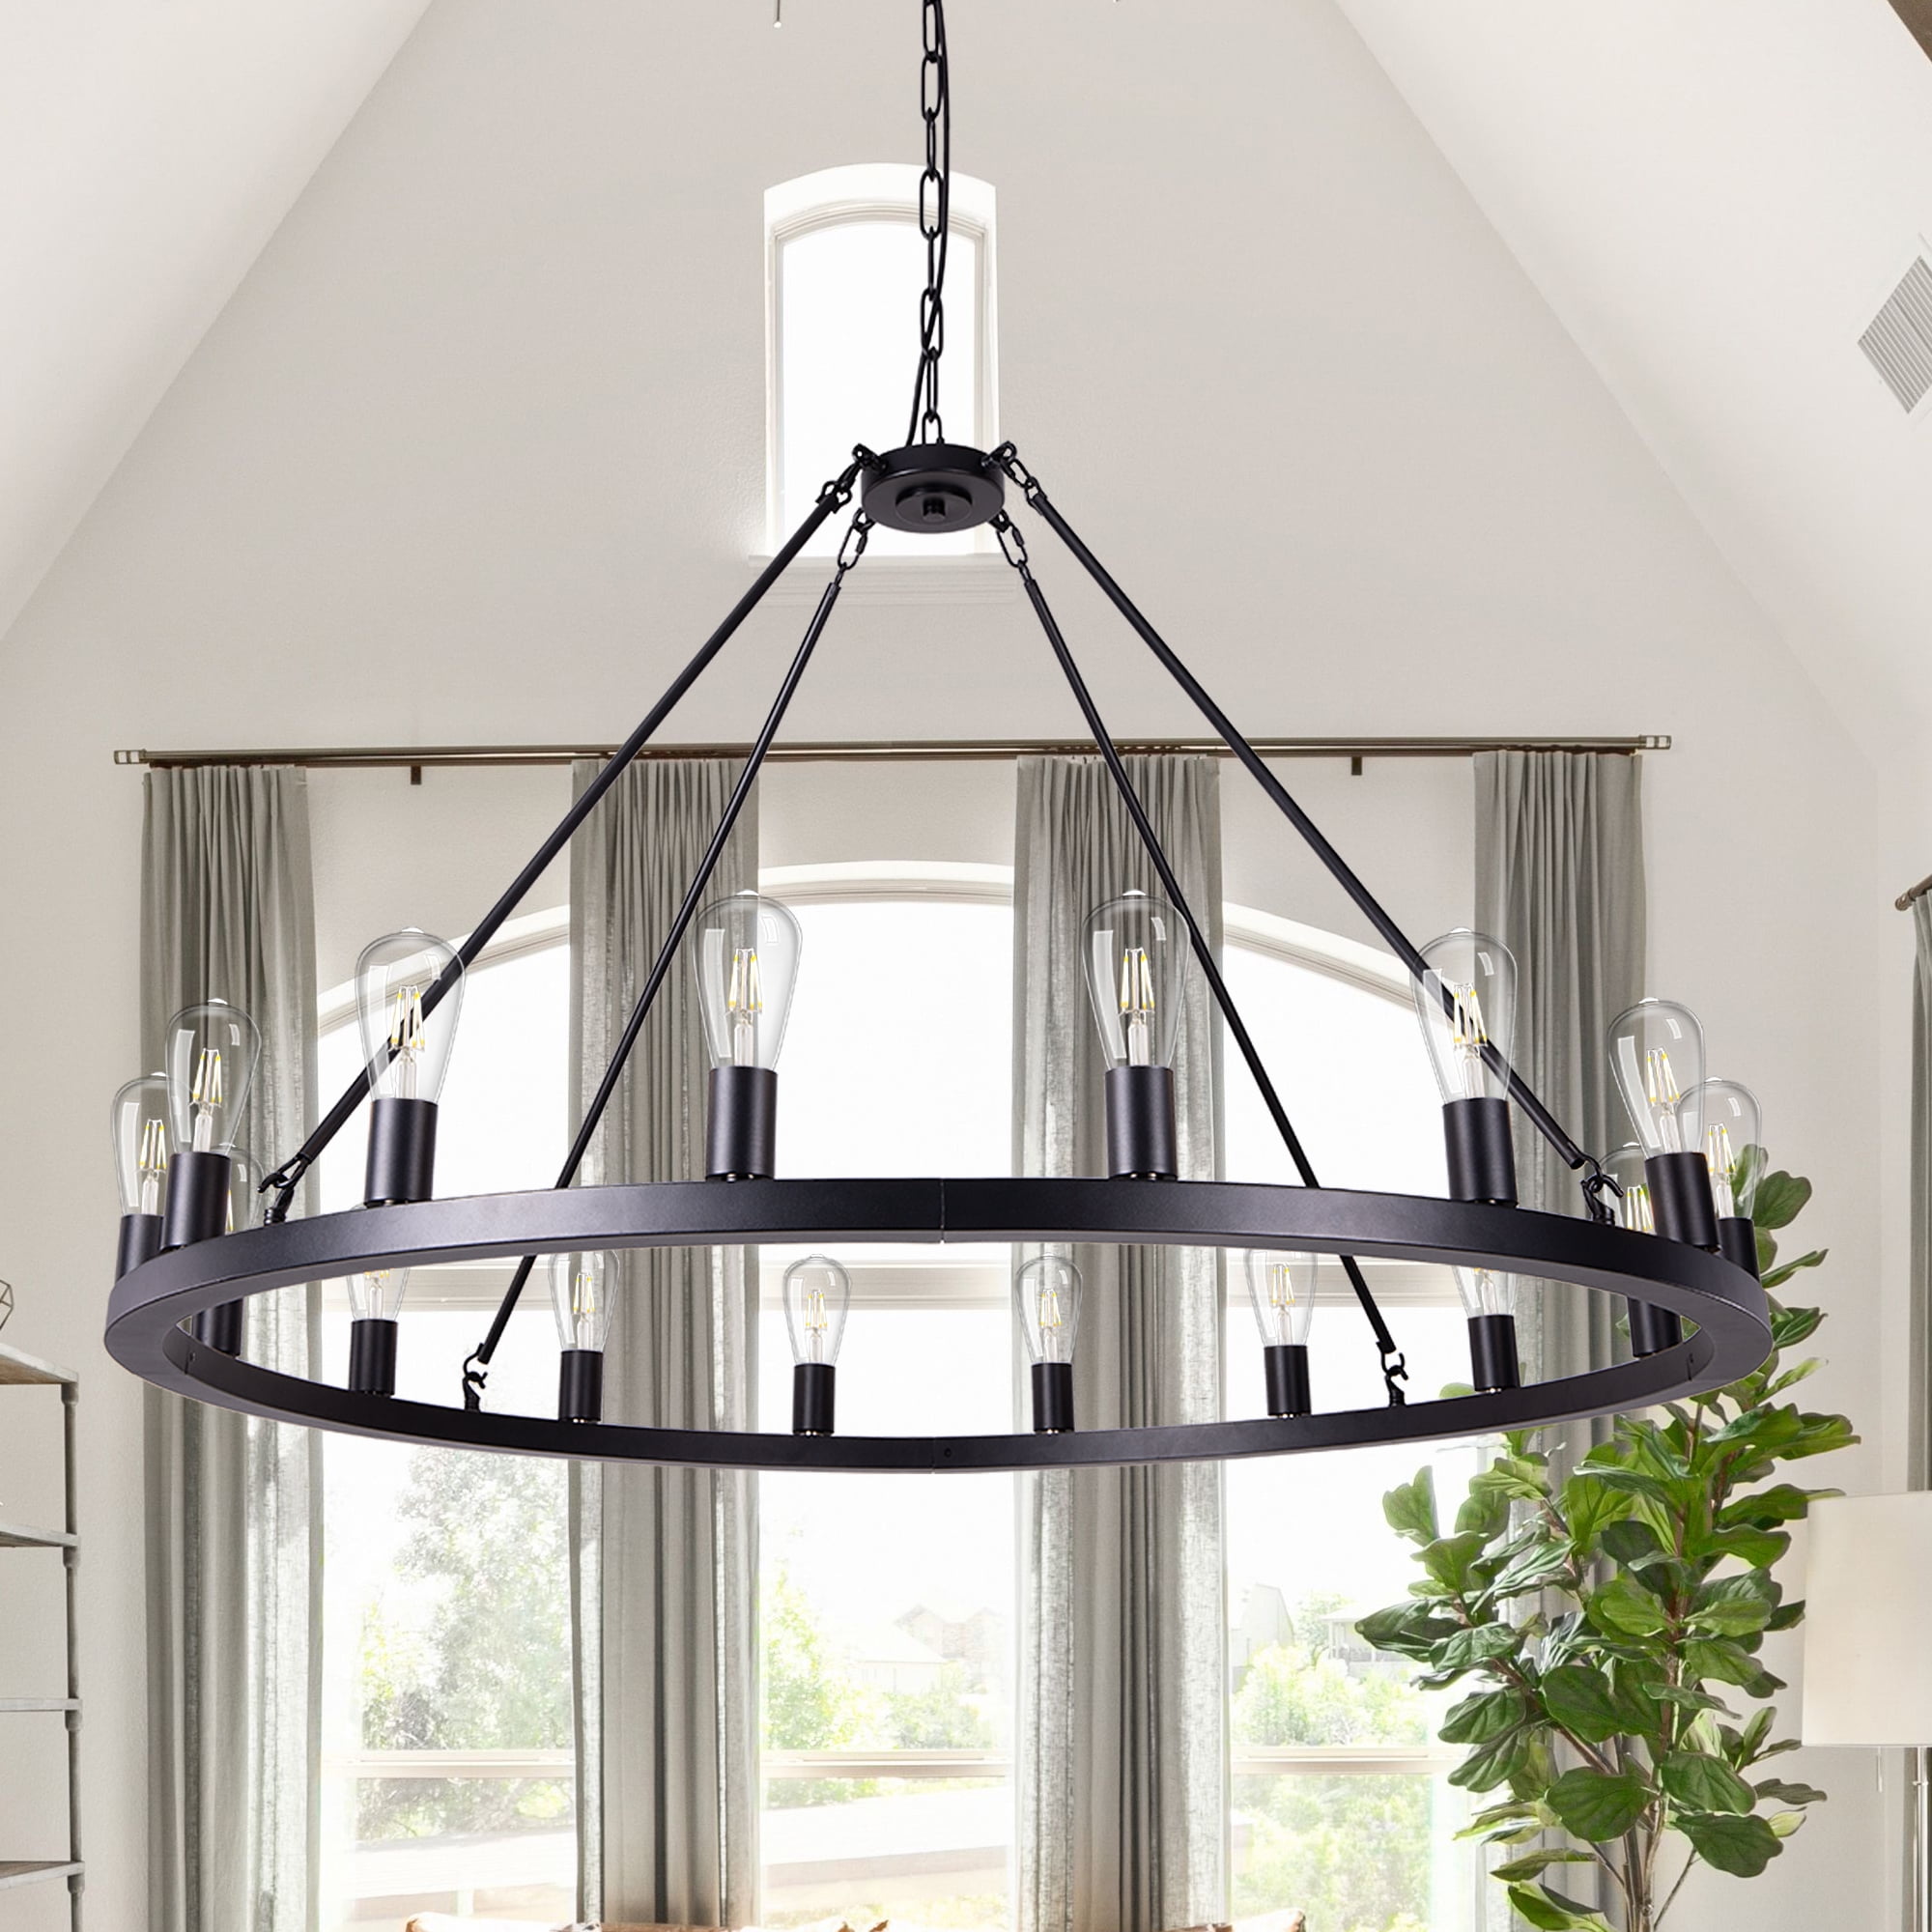 Wellmet Matte Black Wagon Wheel Chandelier 16-Light Diam 47 inch, Farmhouse  Rustic Industrial Country Style Large Round Pendant Light Fixture for 